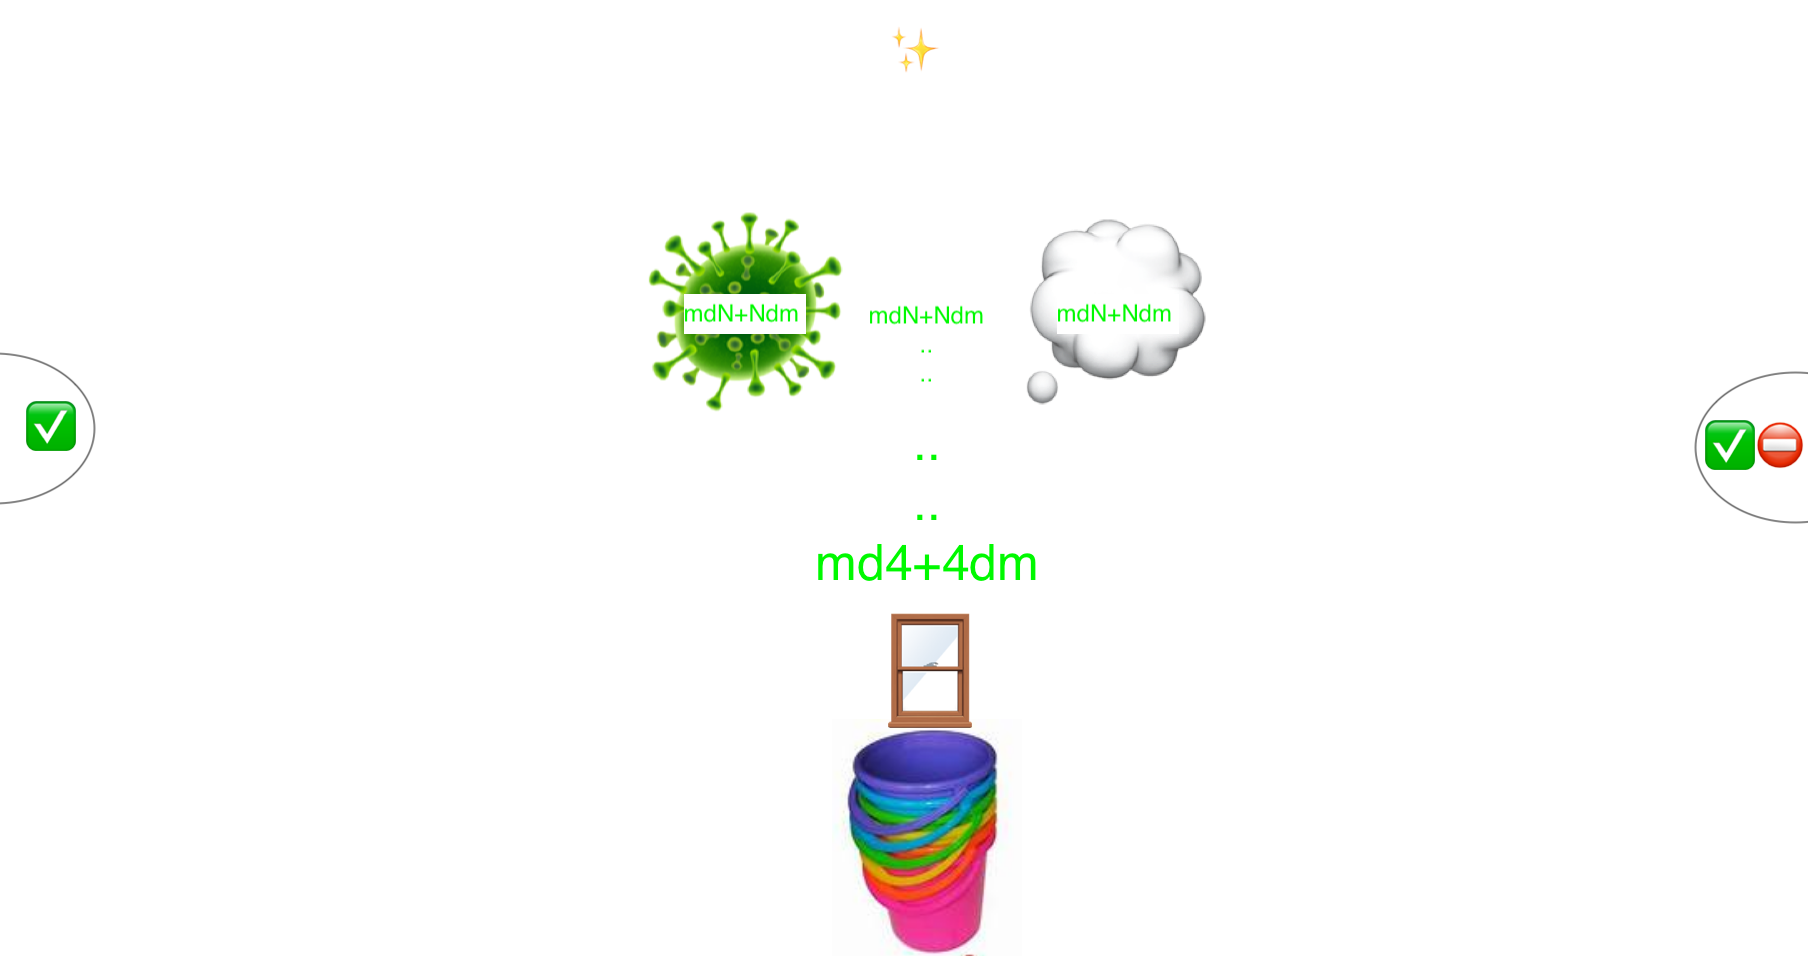 mdnplusndm version 3 with representations of informational bubble and informational virus